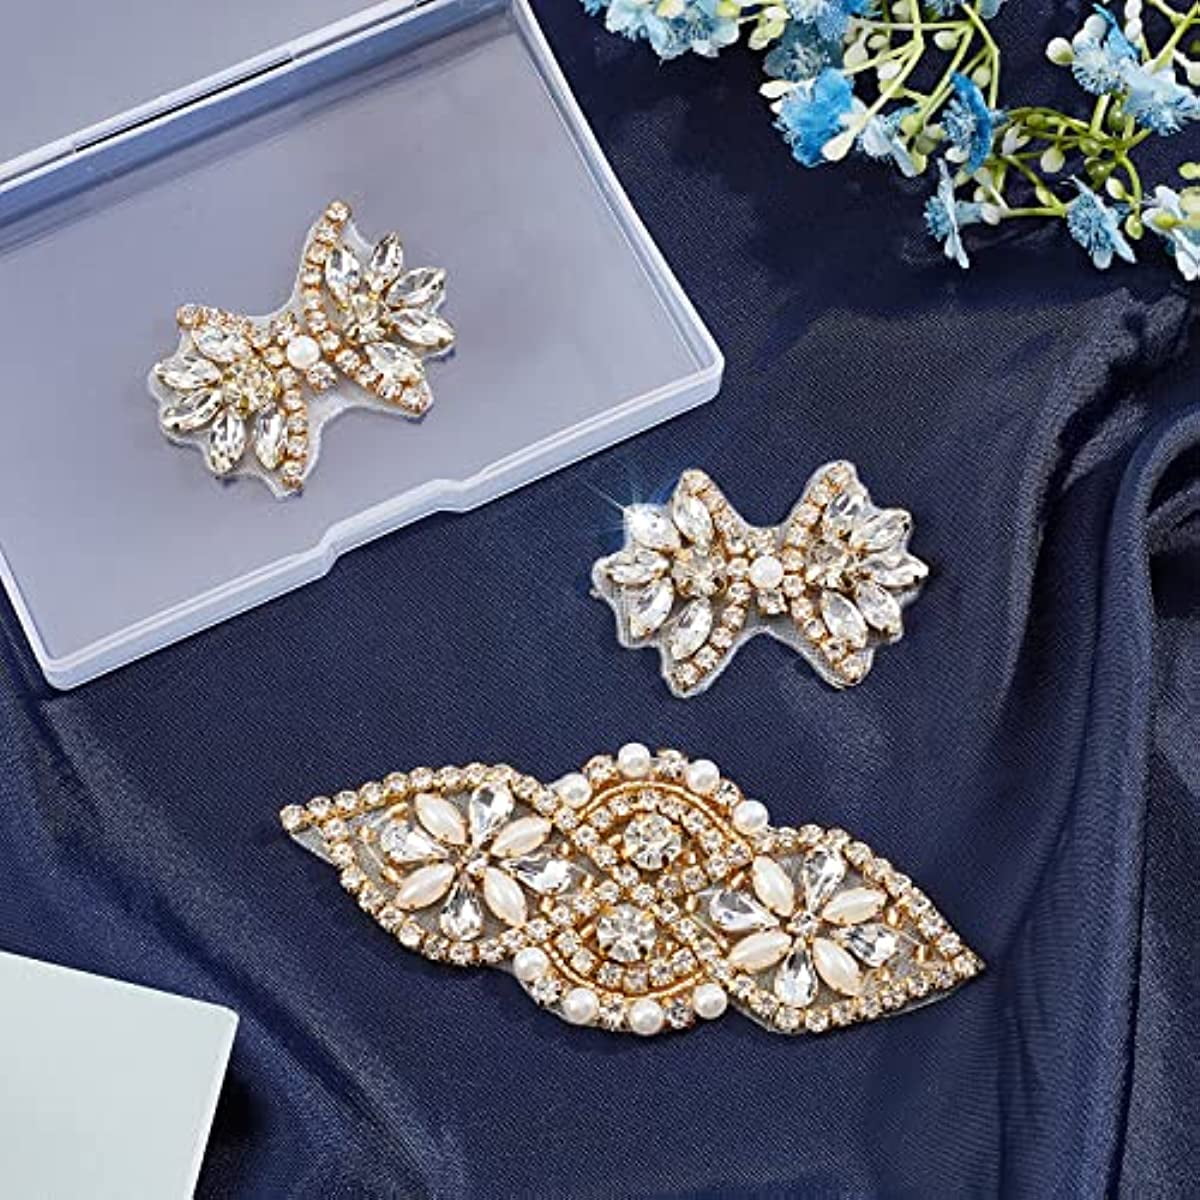  COHEALI 2pcs Rhinestone Applique Decorative Sewing Patches  Embellishments Patches for Clothes Iron on Rhinestone Flock Bride Outfits  Decorative Back Patches Adhesive Stickers Repair